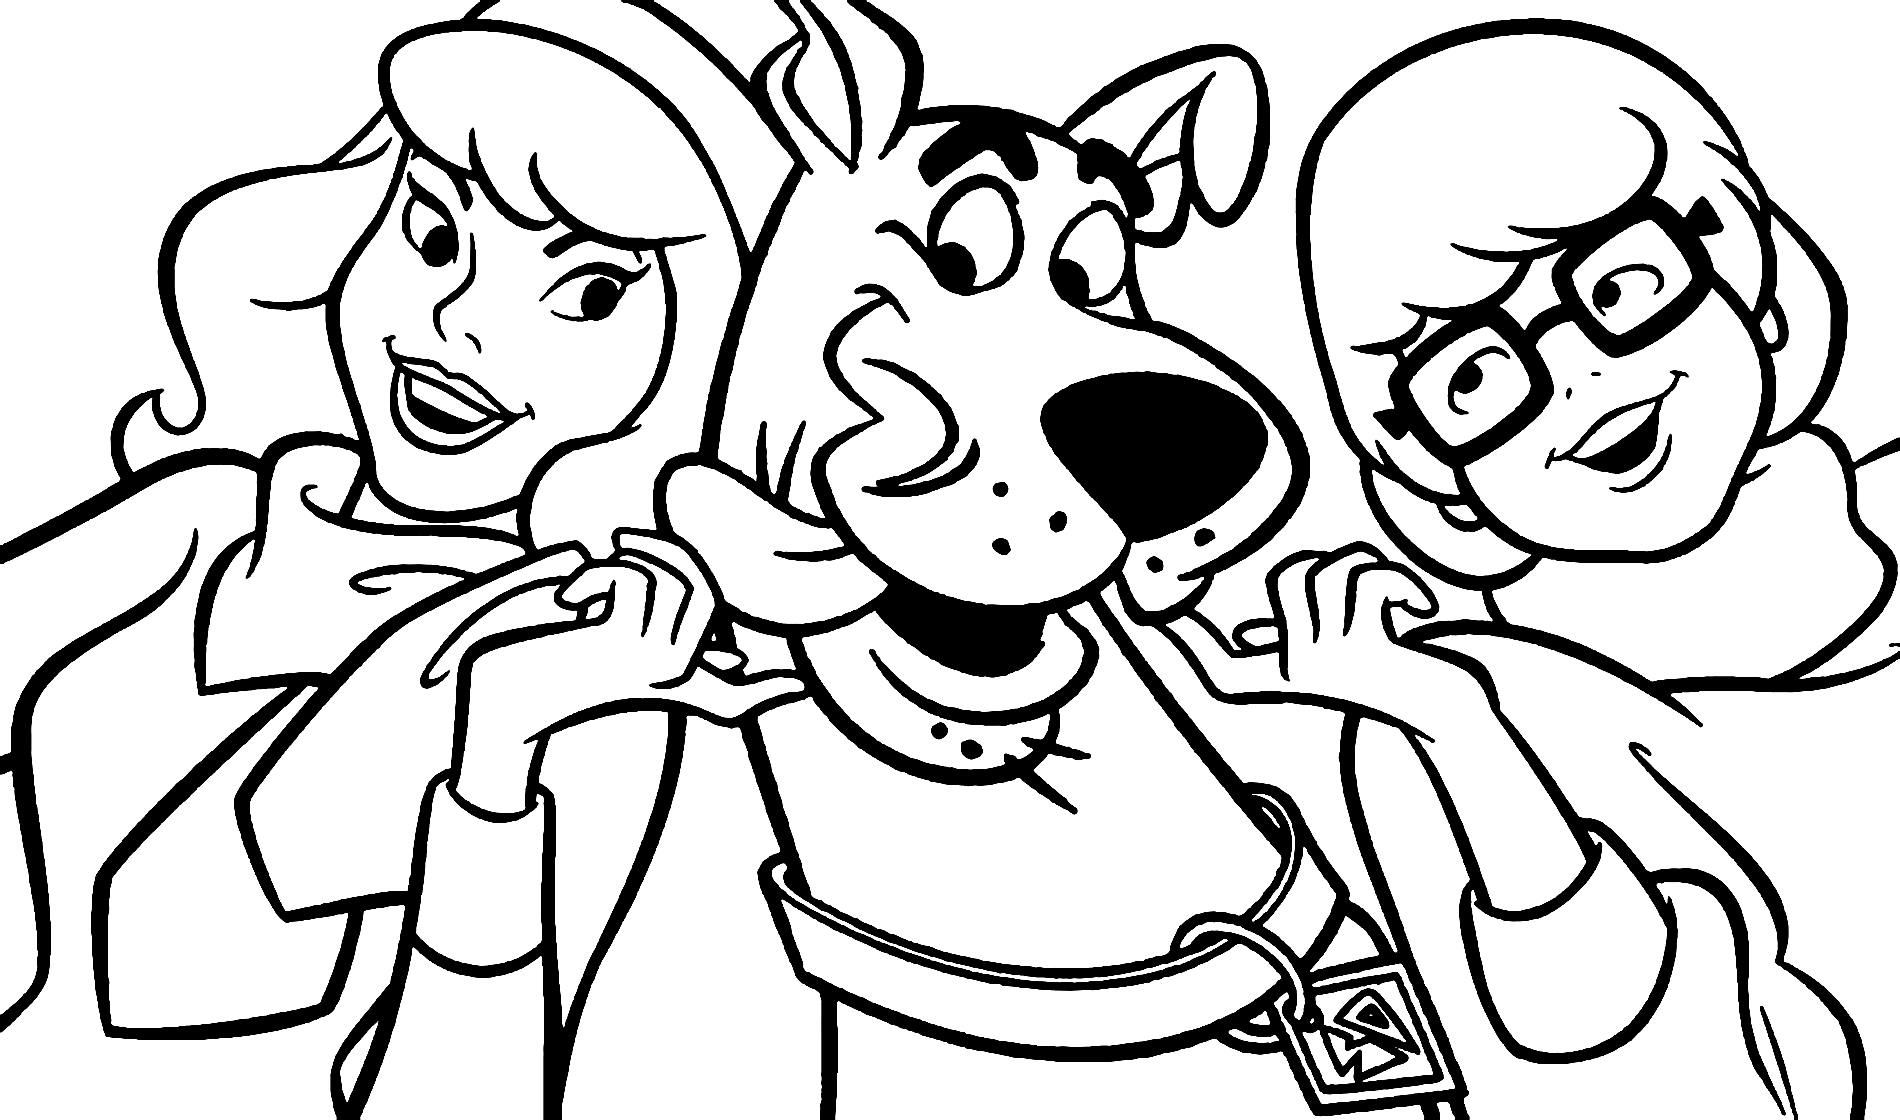 Daphne Velma and Scooby Doo Printable Coloring Page